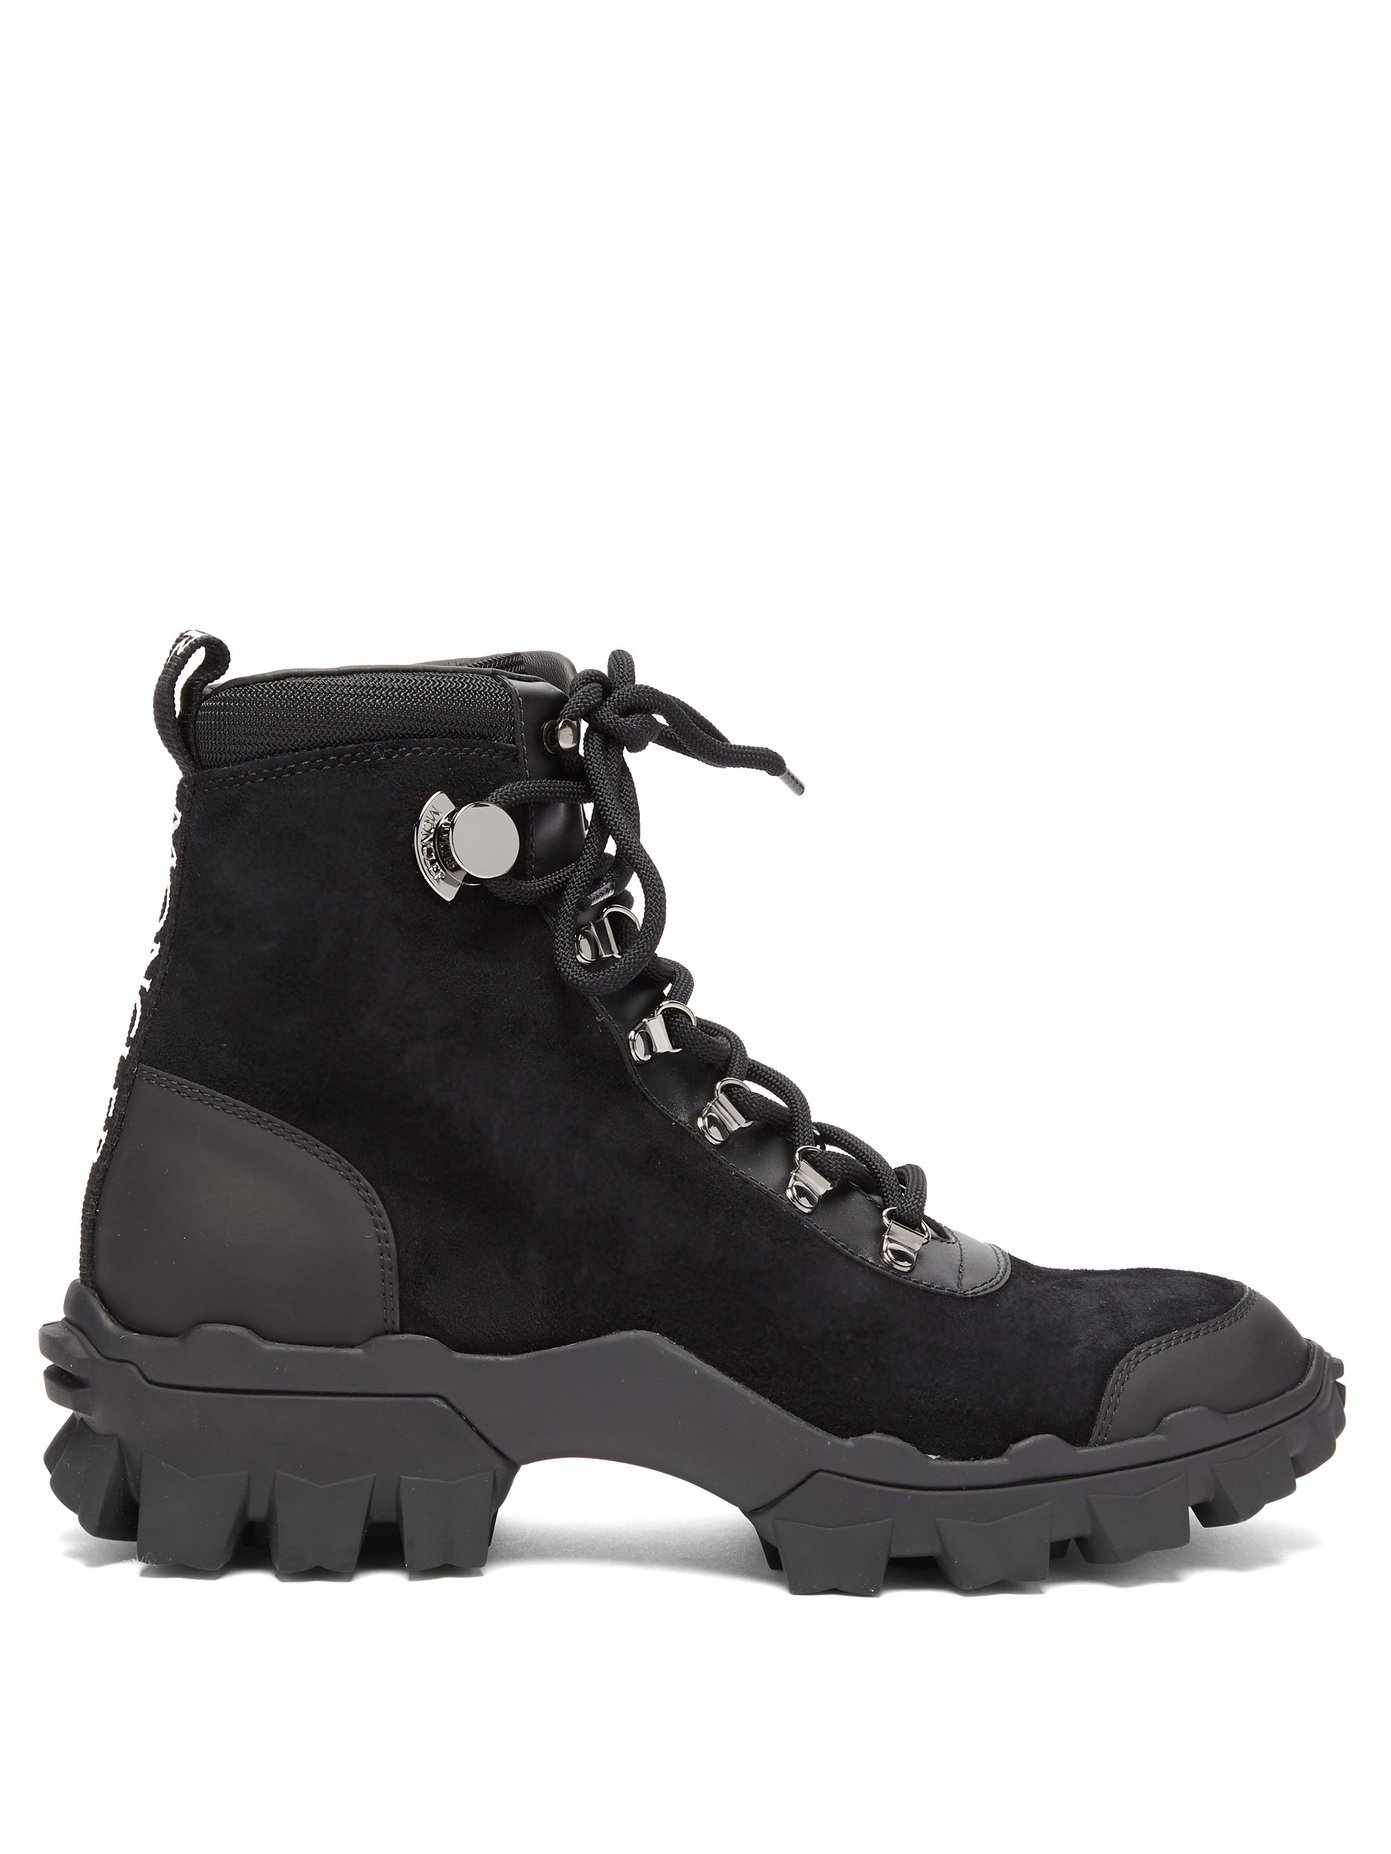 moncler hiking boots sale